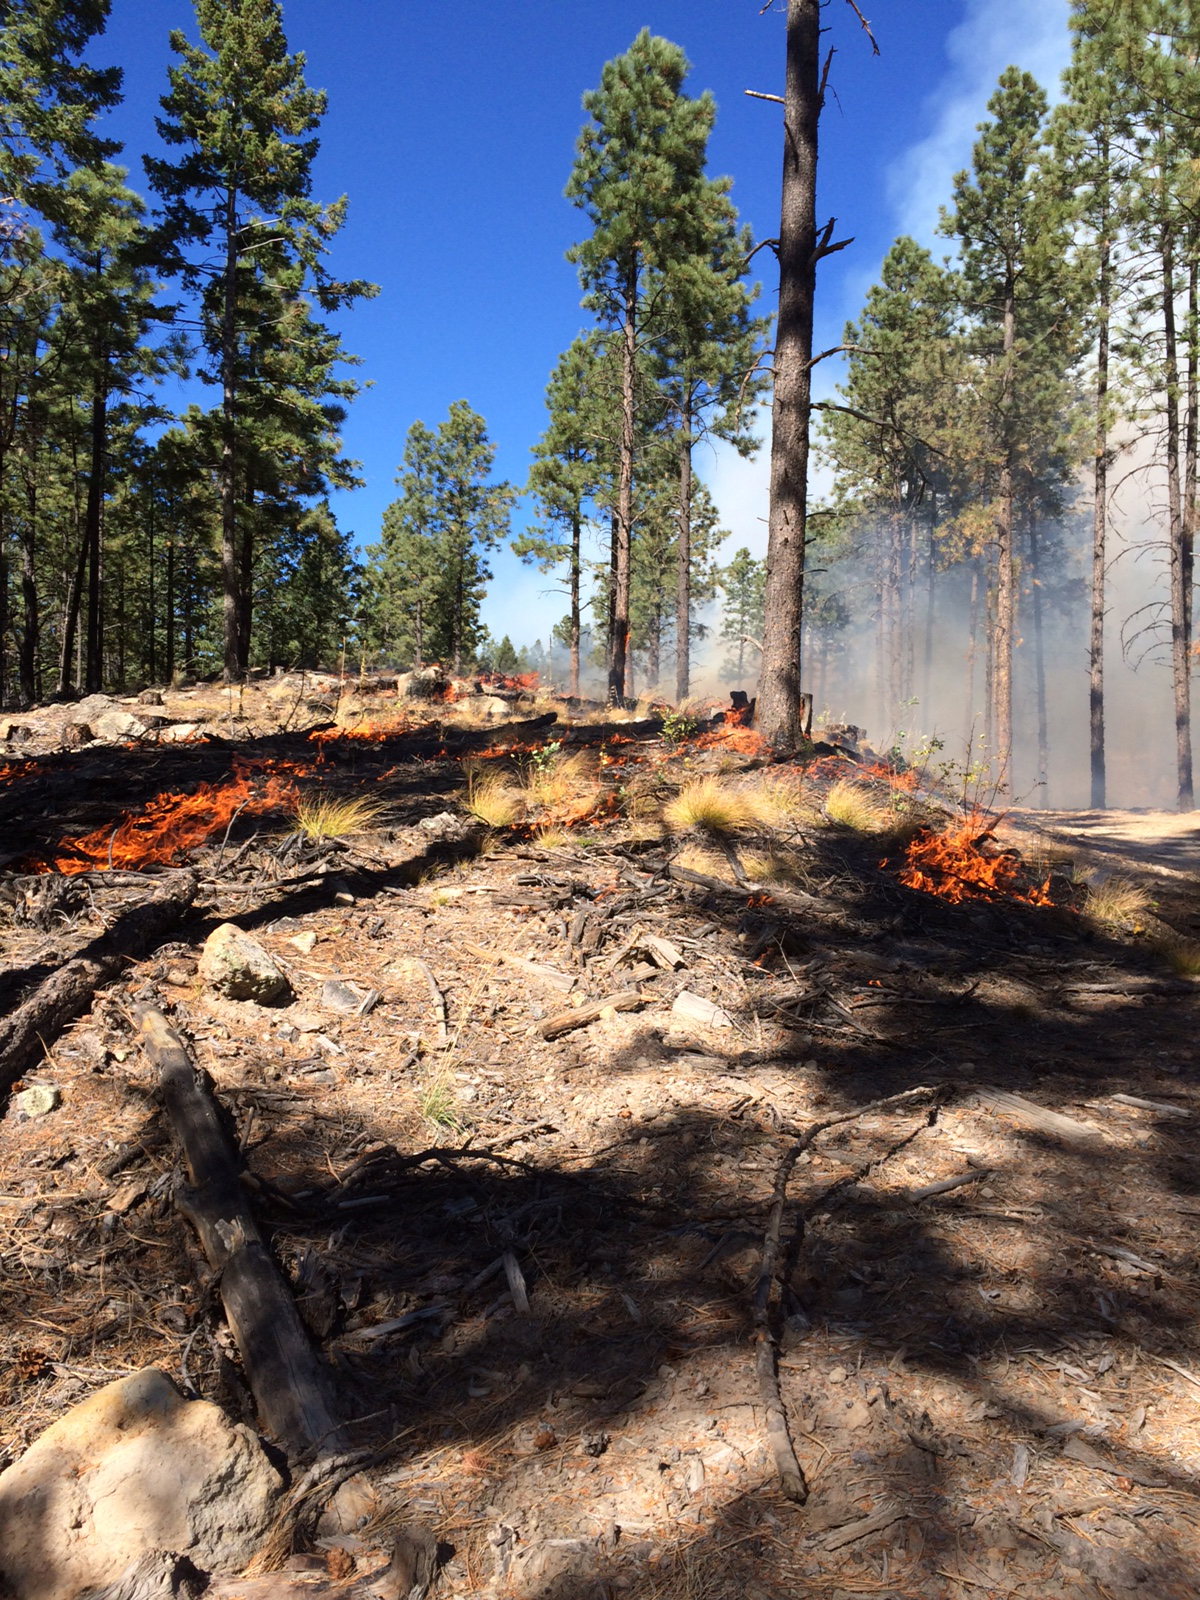 Low flames burn up ground litter and leave trees unharmed